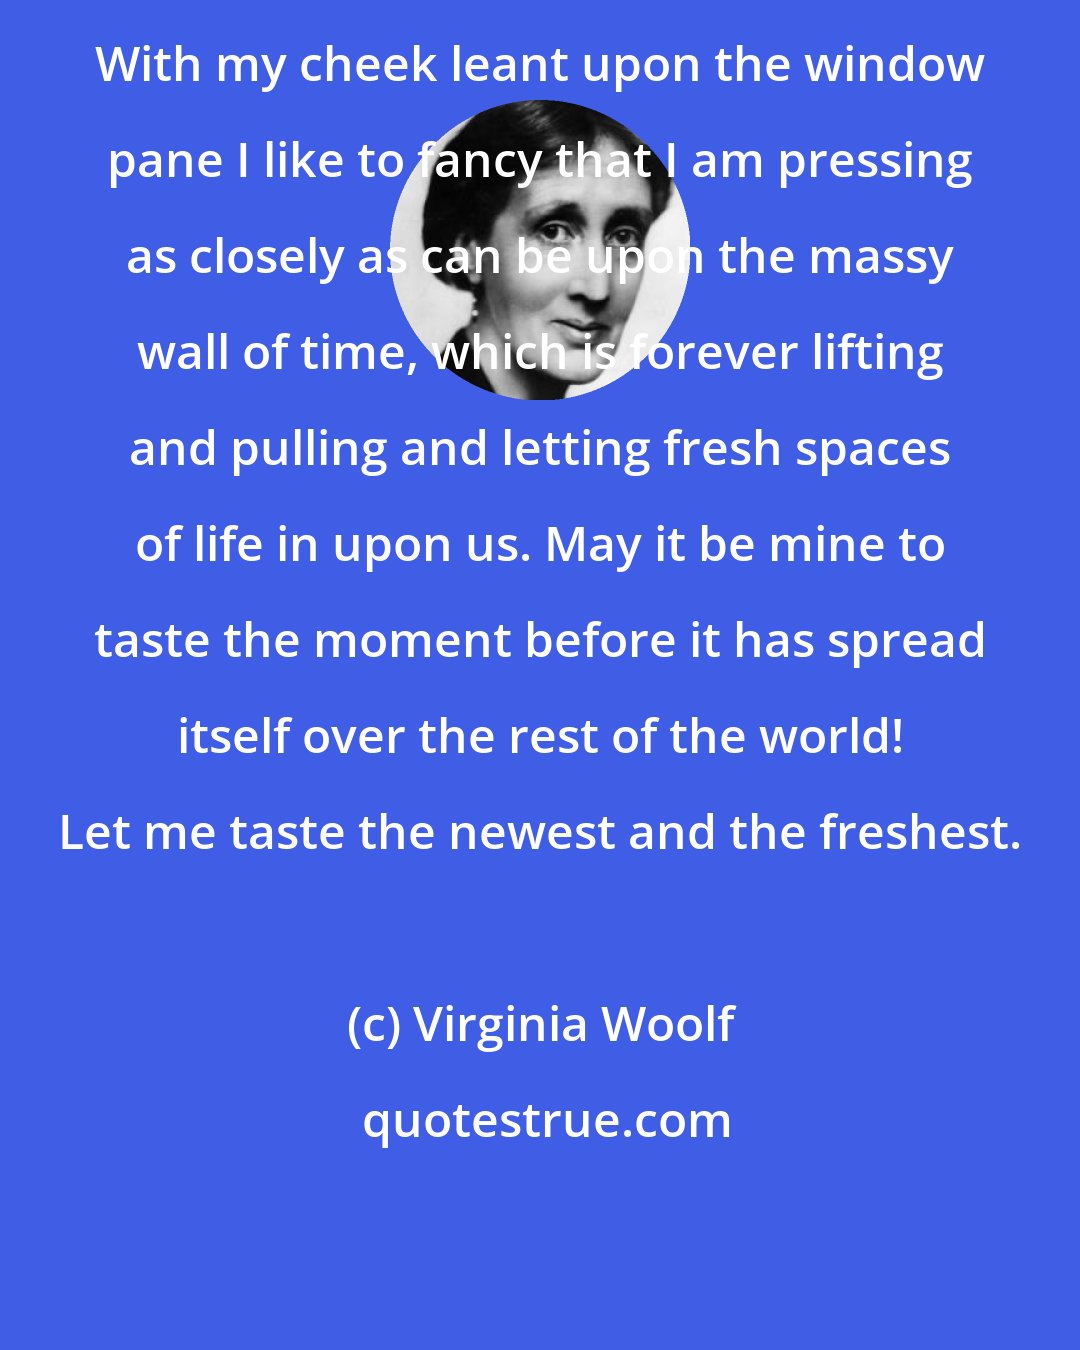 Virginia Woolf: With my cheek leant upon the window pane I like to fancy that I am pressing as closely as can be upon the massy wall of time, which is forever lifting and pulling and letting fresh spaces of life in upon us. May it be mine to taste the moment before it has spread itself over the rest of the world! Let me taste the newest and the freshest.